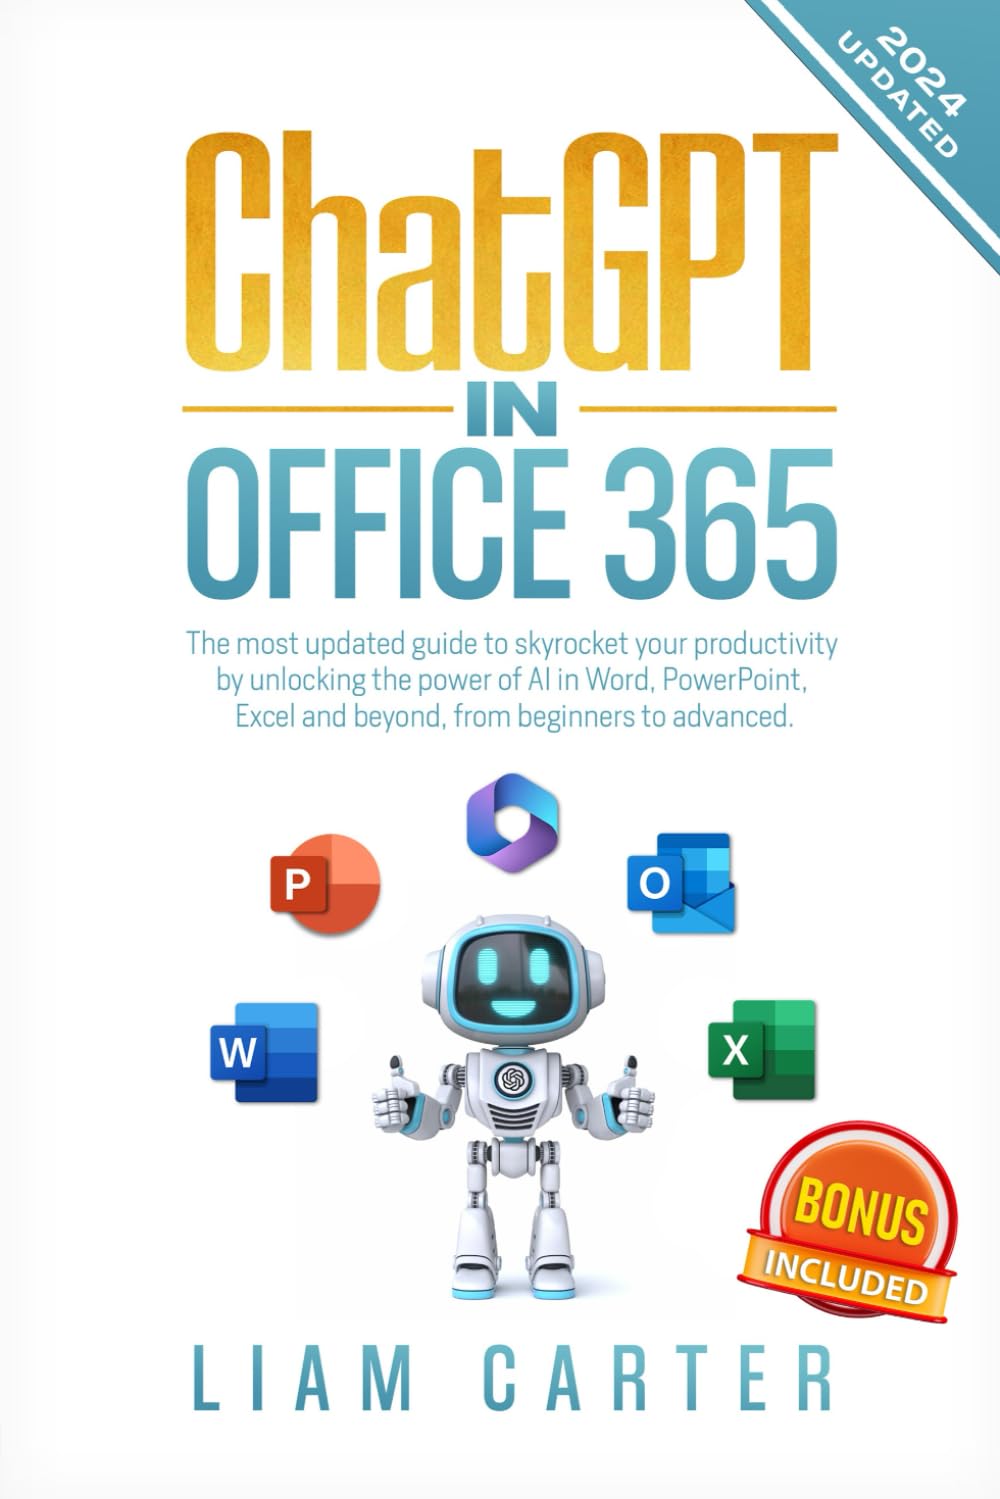 ChatGPT in Office 365: The most updated guide to skyrocket your productivity by unlocking the power of AI in Word, PowerPoint, Excel and beyond, from beginners to advanced.